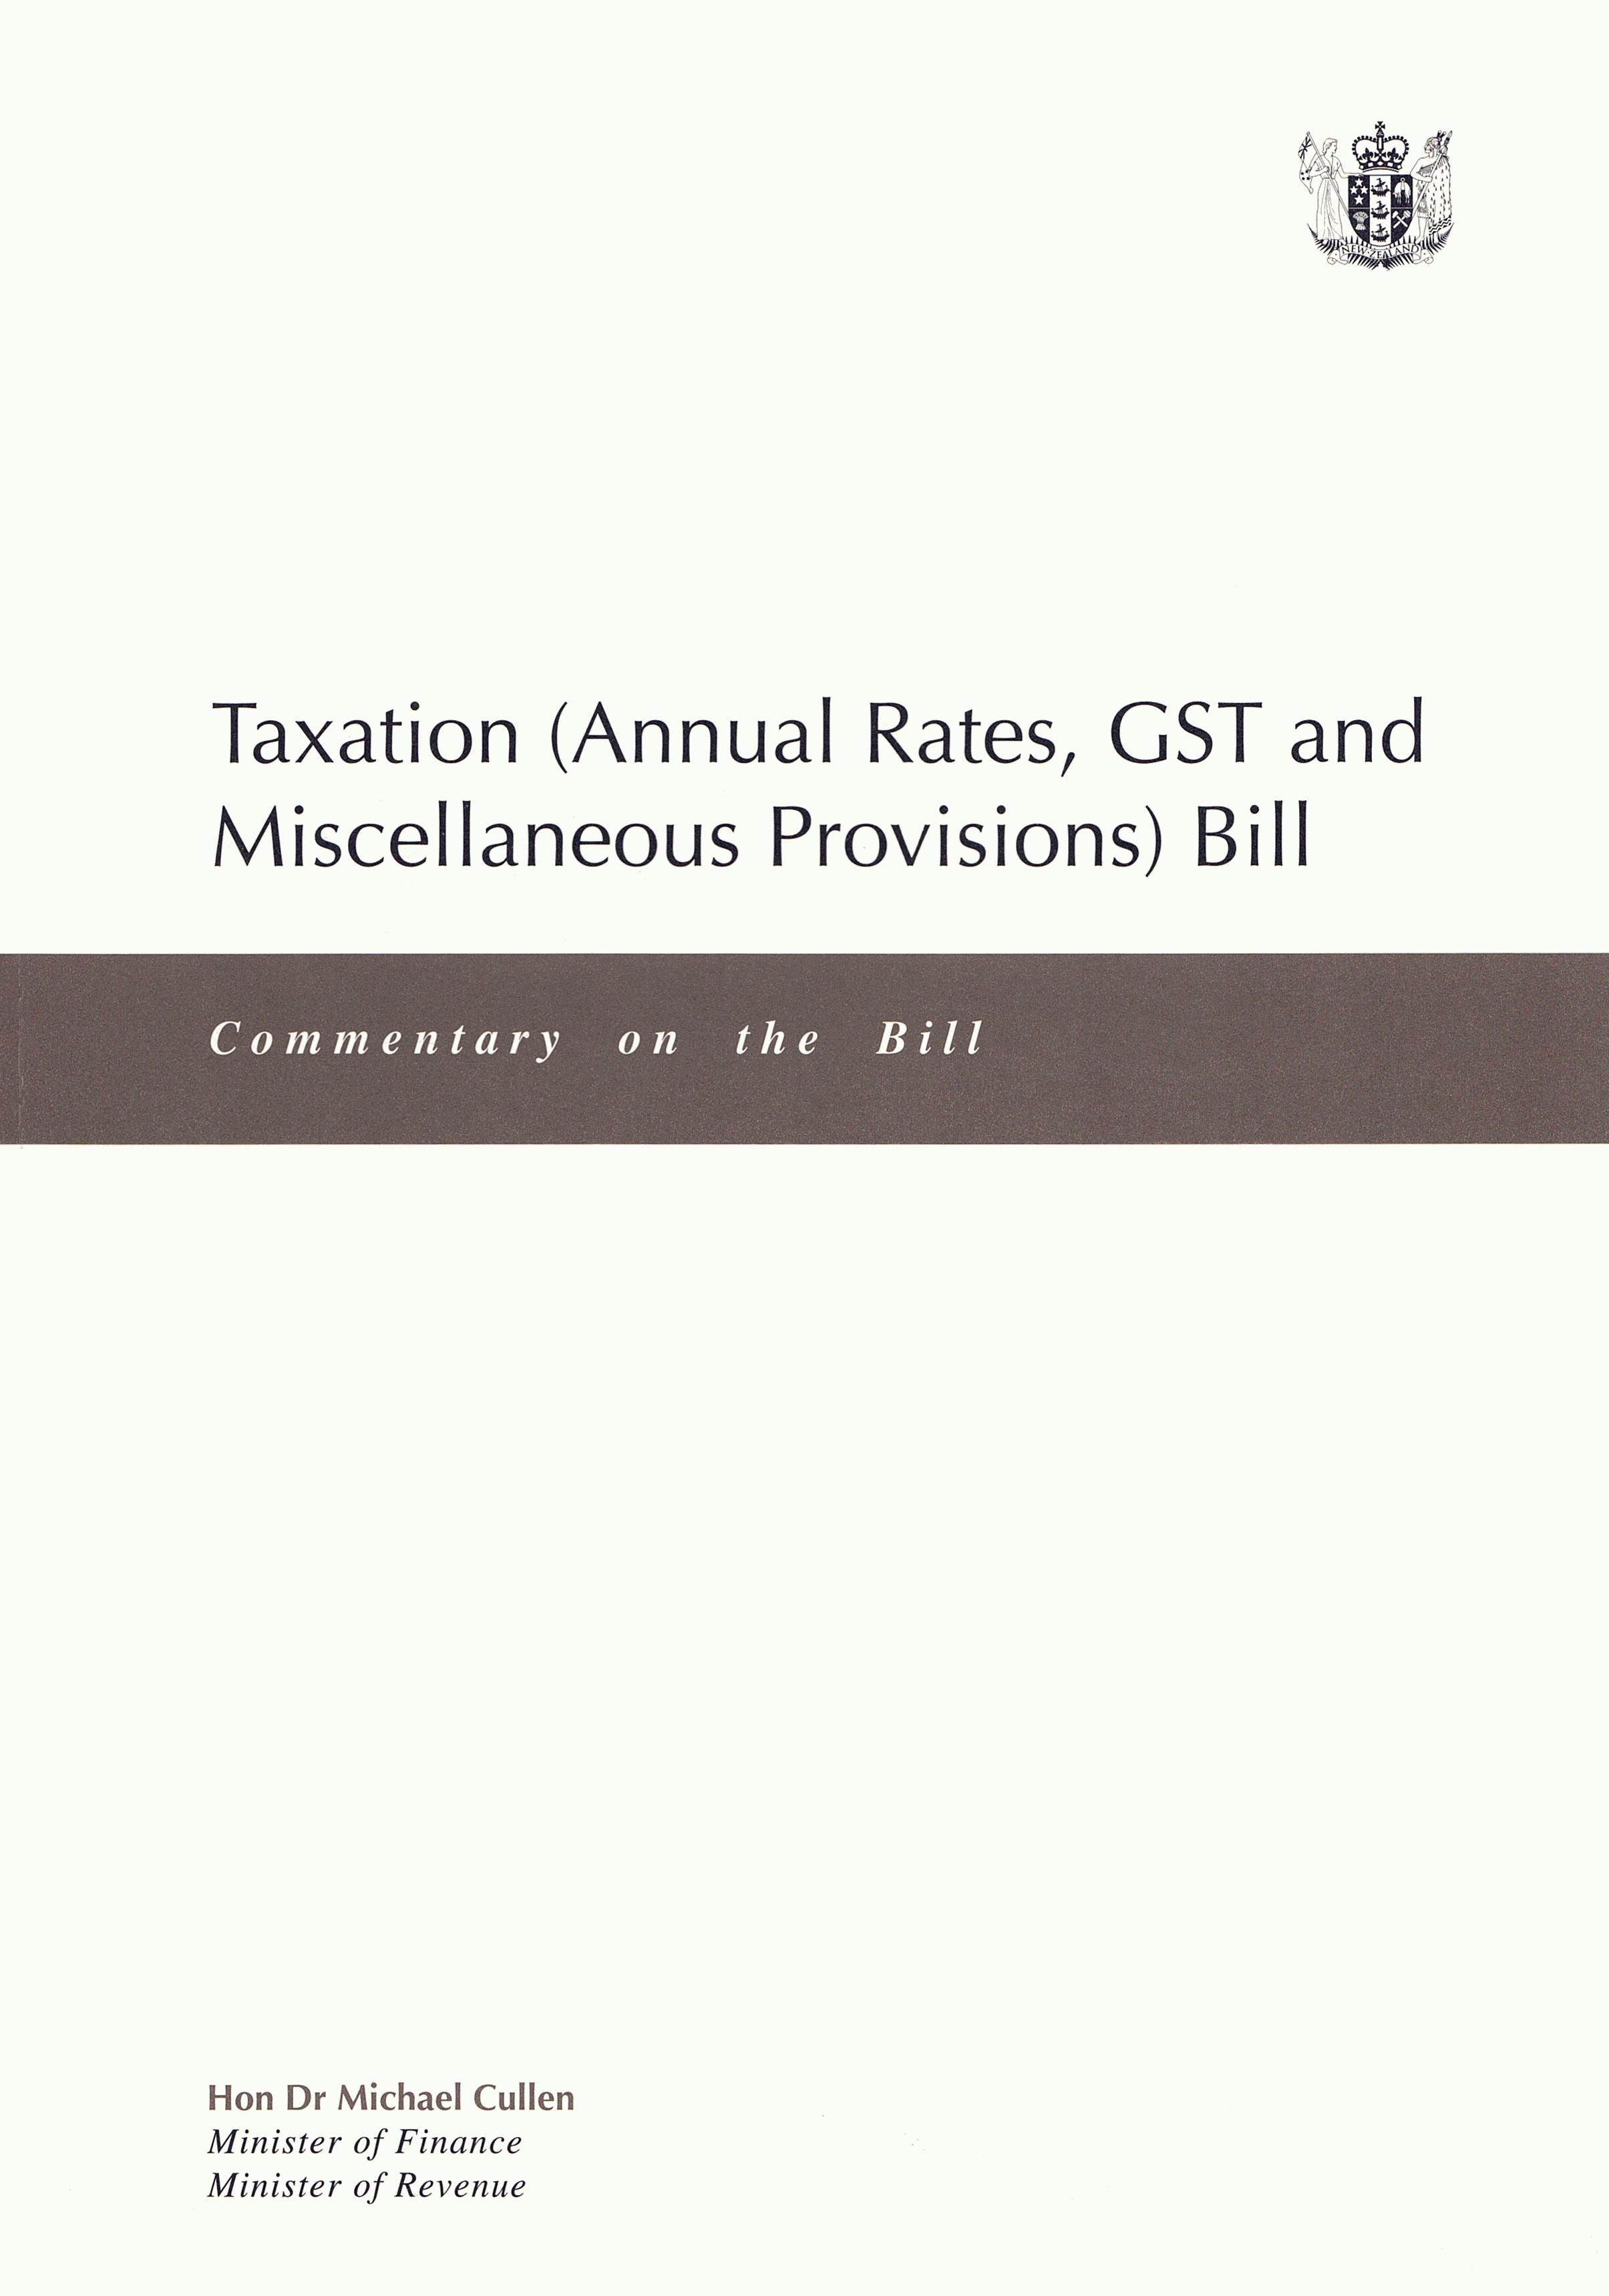 Publication cover image. Title = Taxation (Annual Rates, GST and Miscellaneous Provisions) Bill - Commentary on the Bill. May 2000.